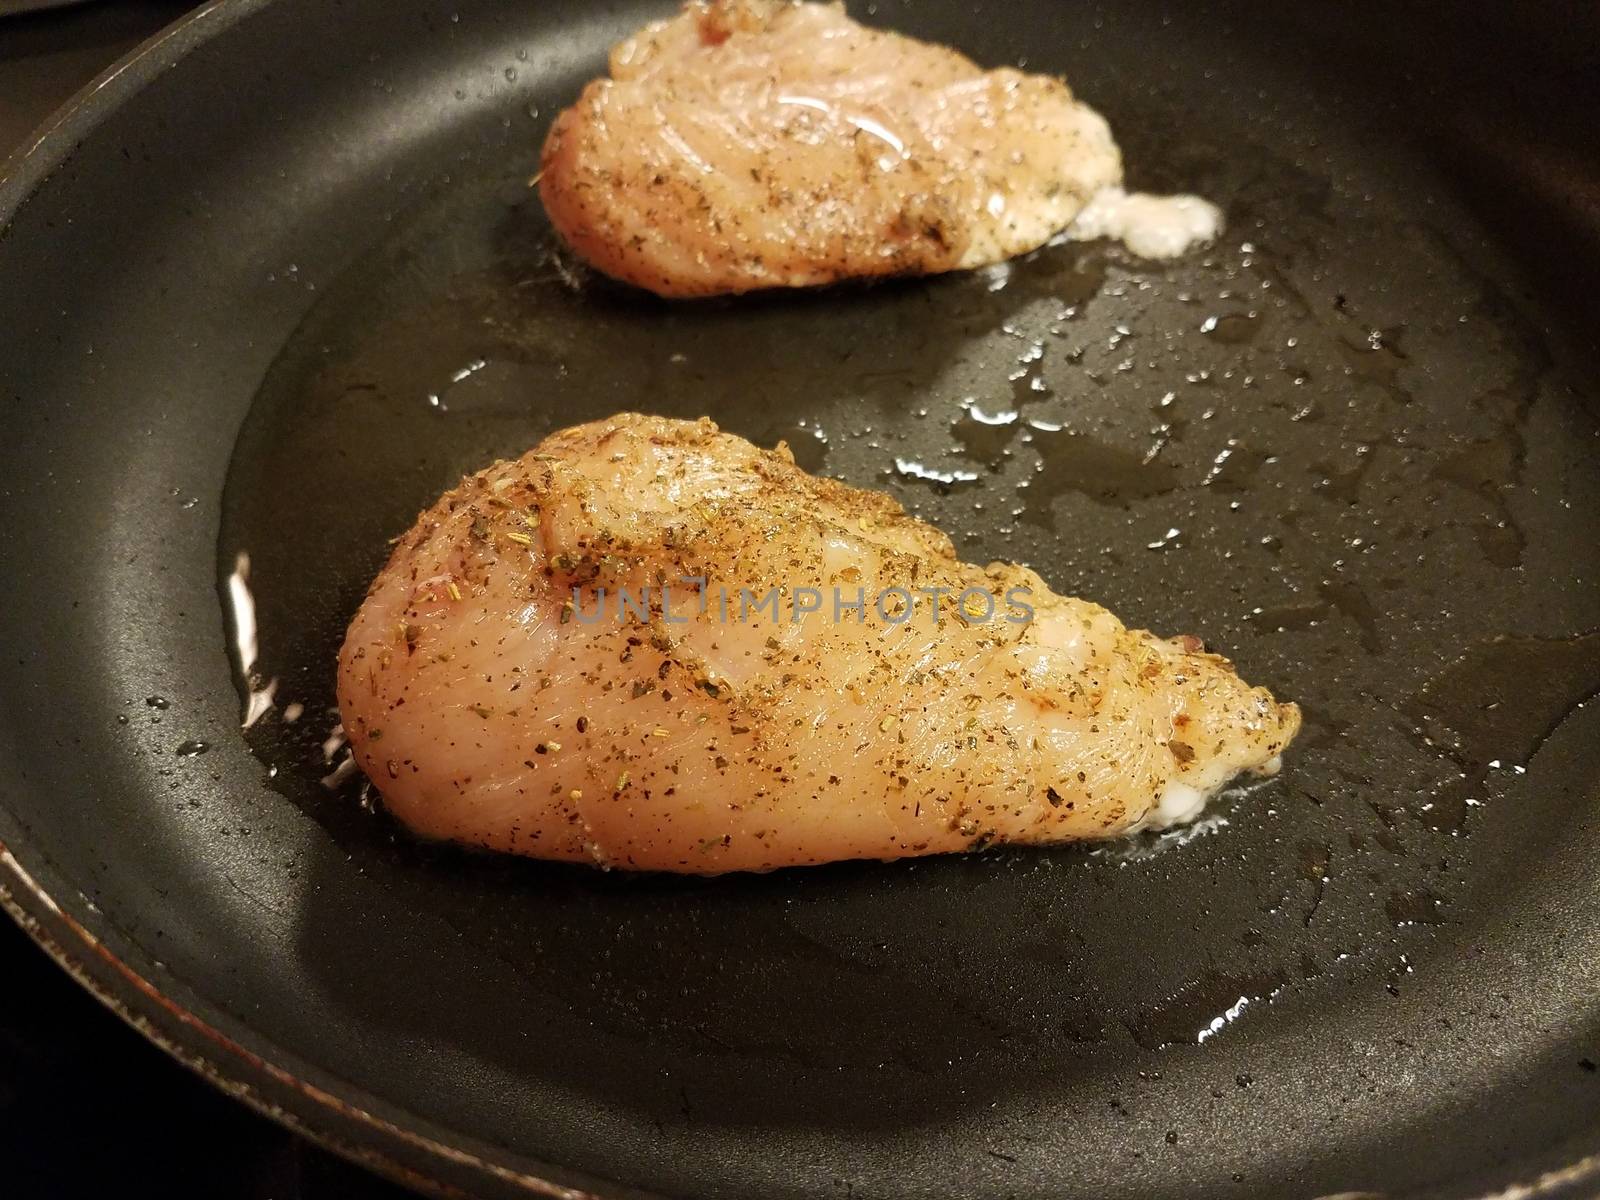 seasoned chicken breast or poultry in pan or skillet with oil